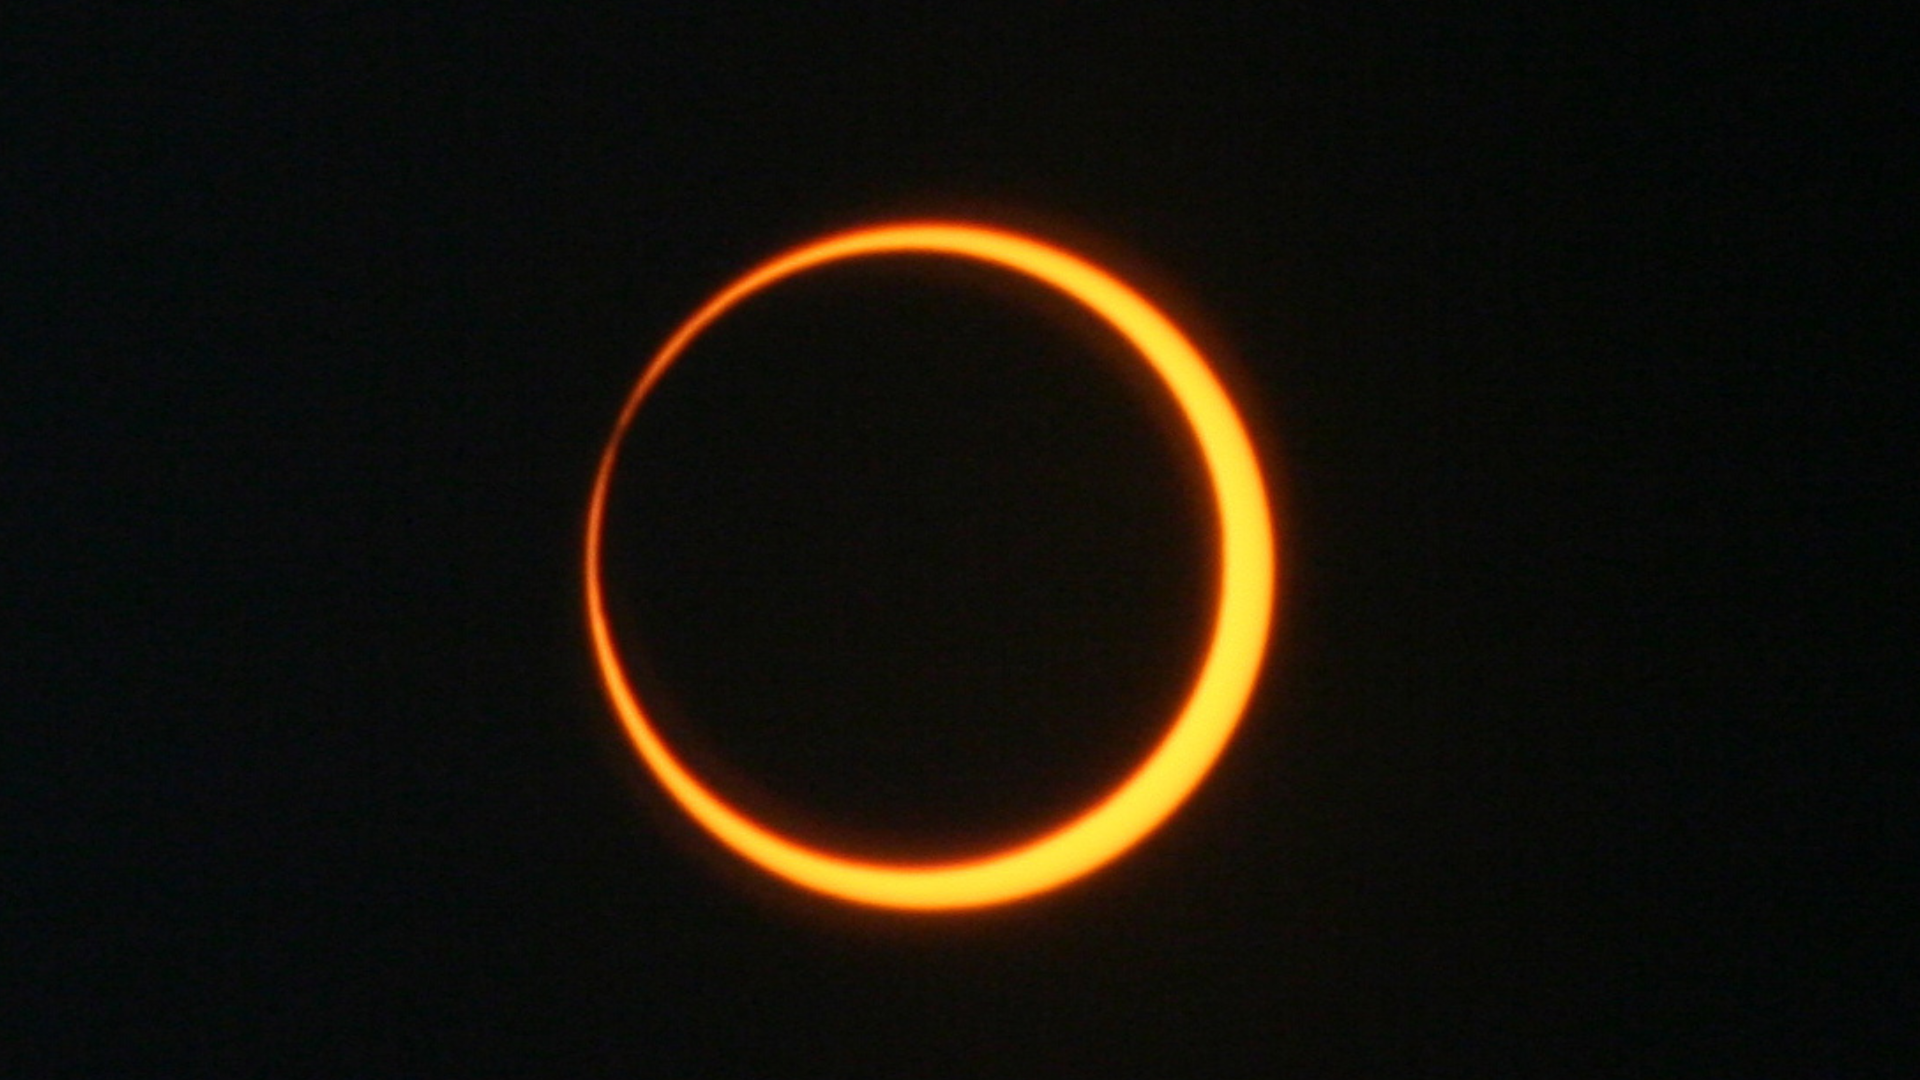 Get ready for the ‘ring of fire’ solar eclipse of October 2023 with